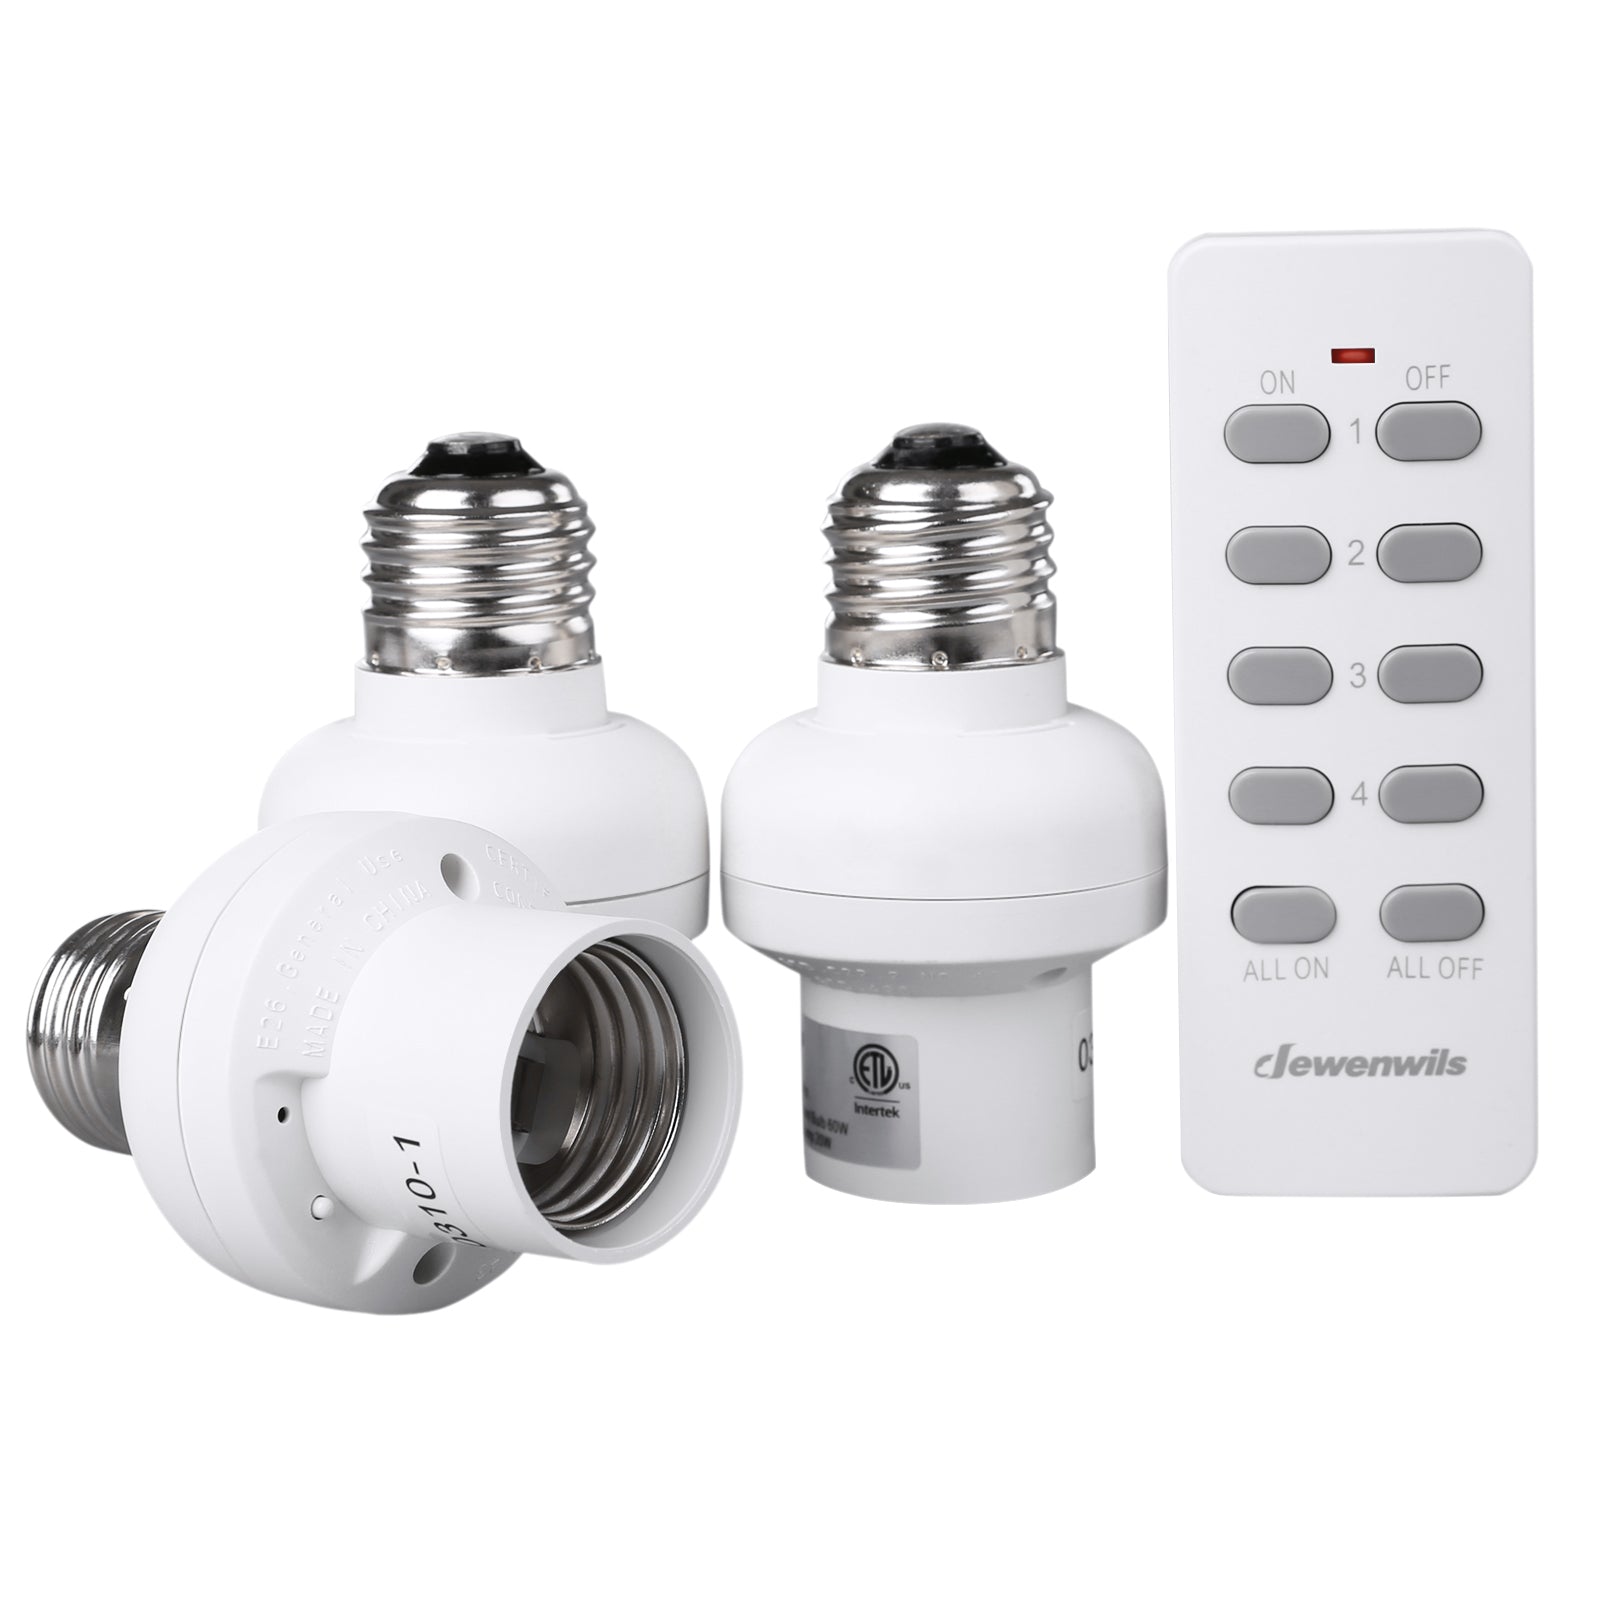 DEWENWILS Remote Control Light Socket, Wireless Remote Light Bulbs Switch System, 80 ft RF Range, for Pull Chain Light Fixture